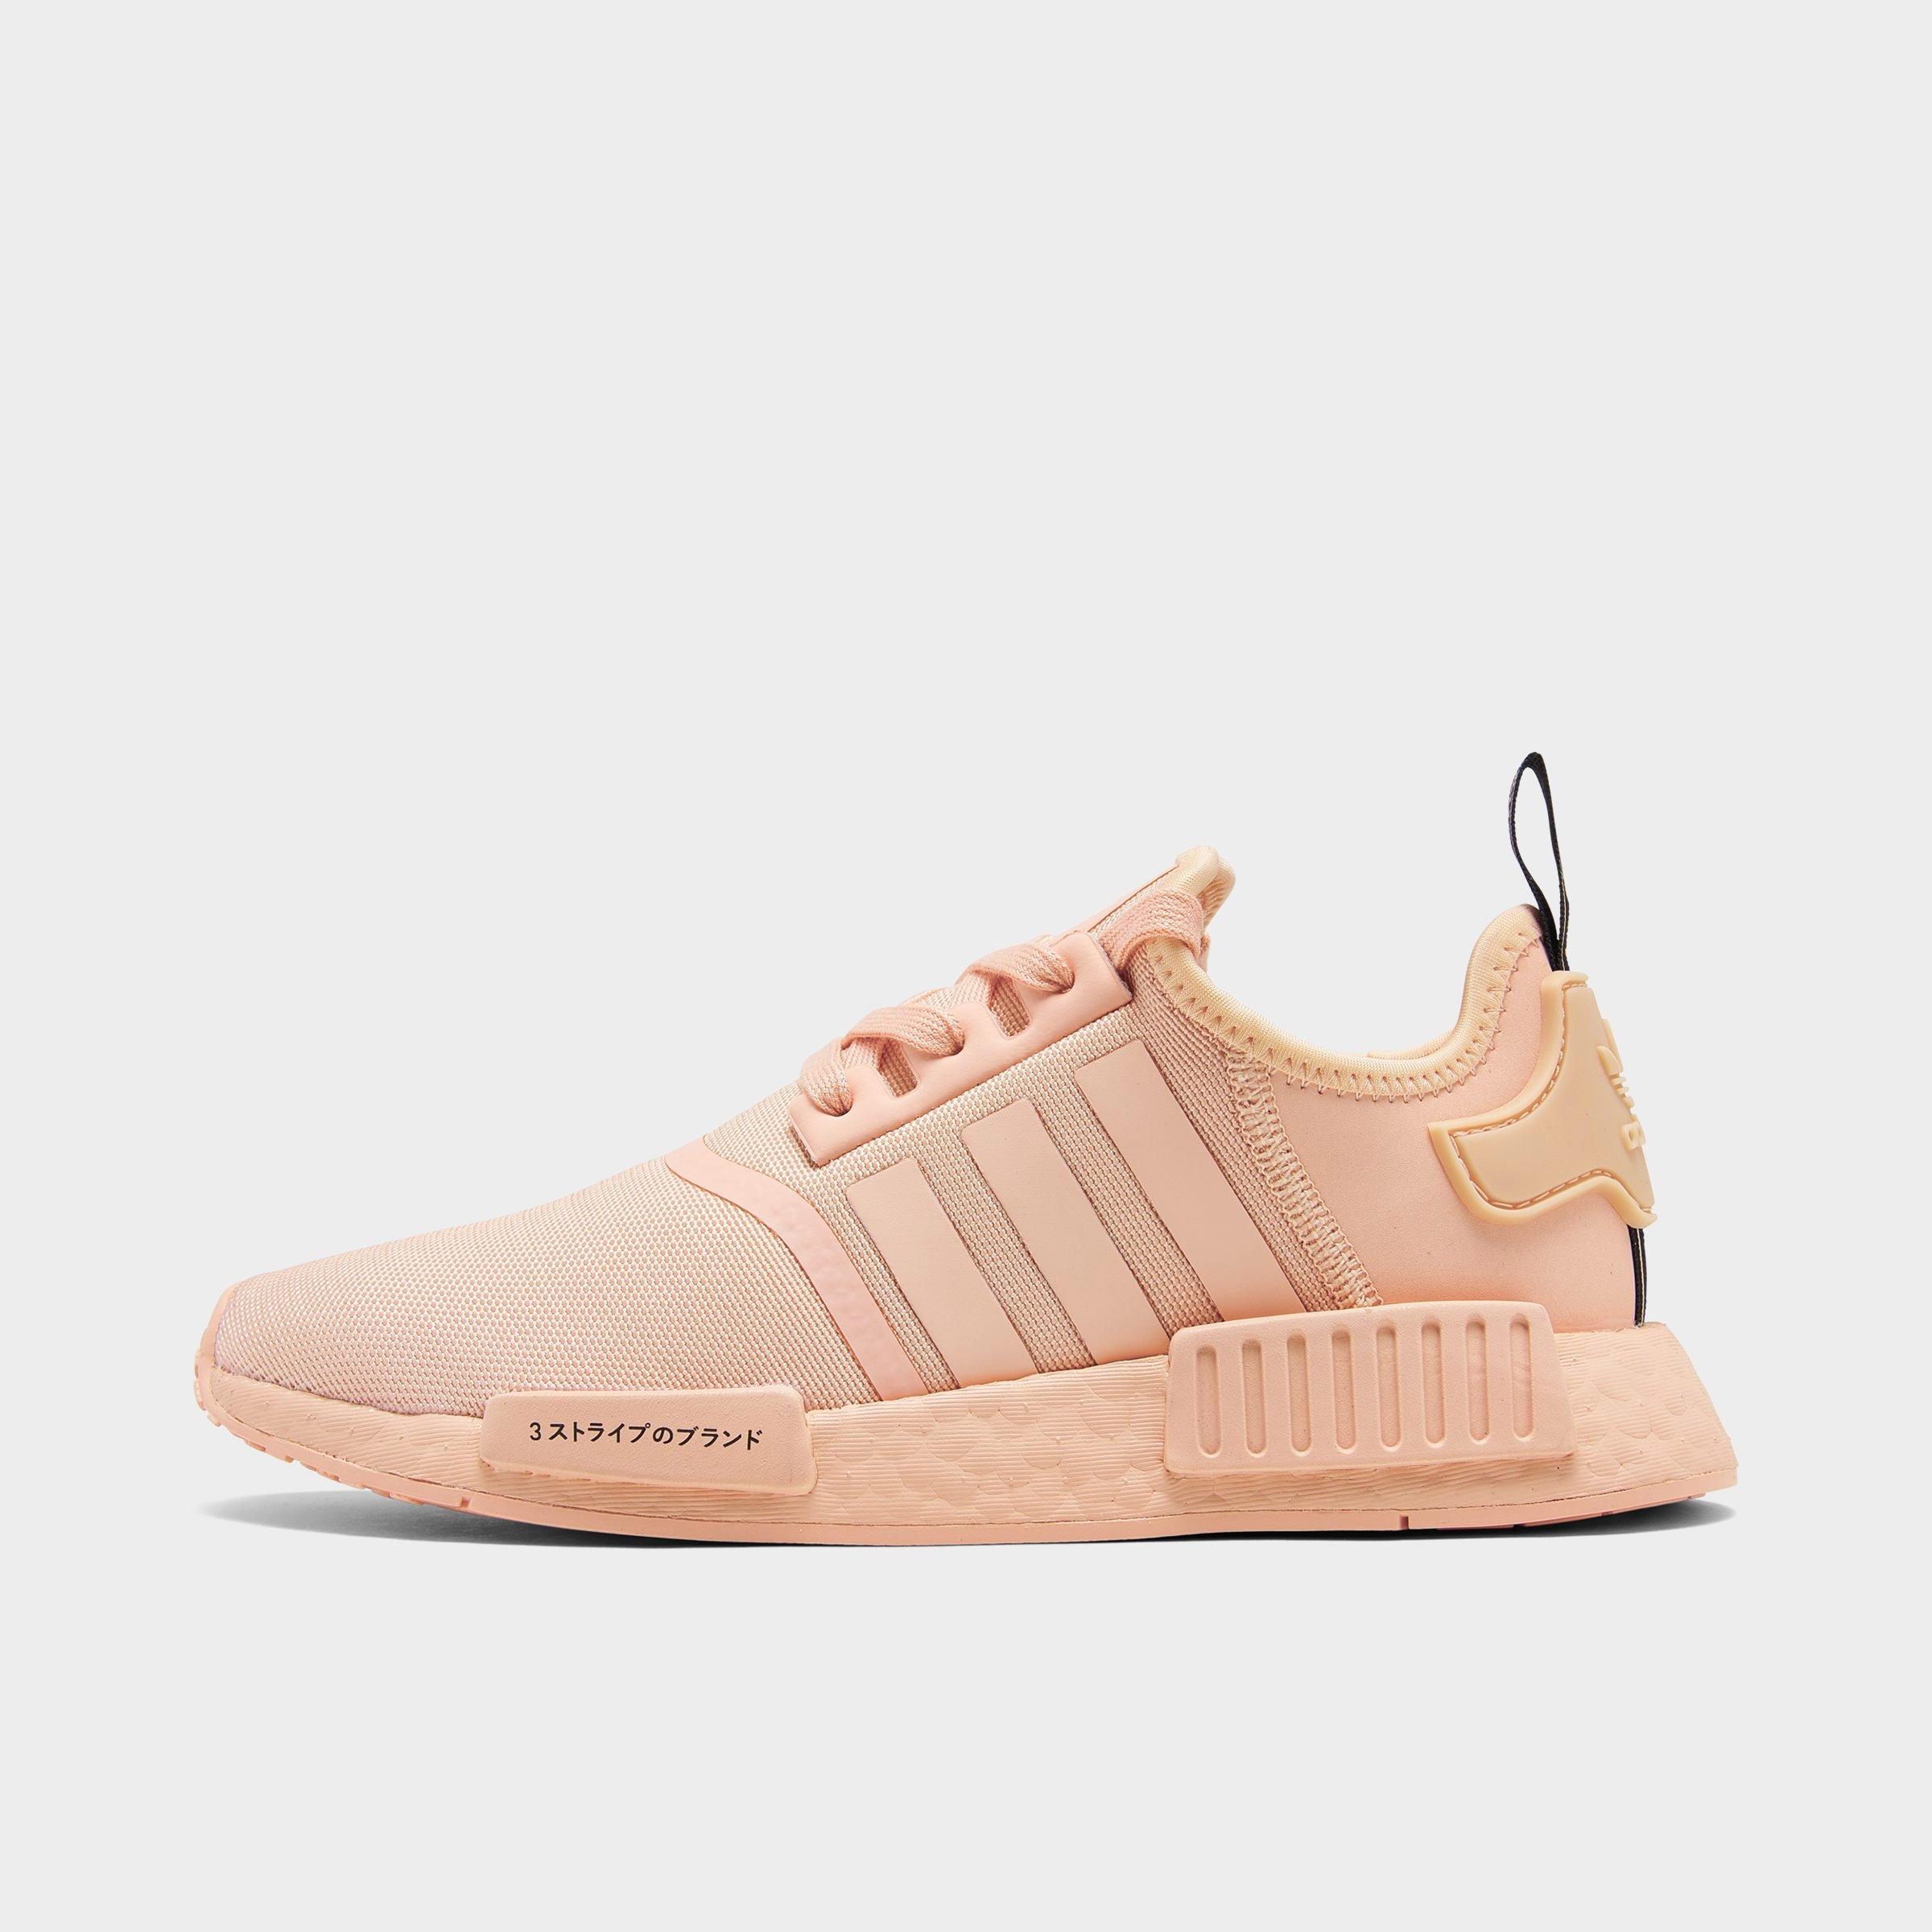 women's adidas nmd r1 casual shoes pink